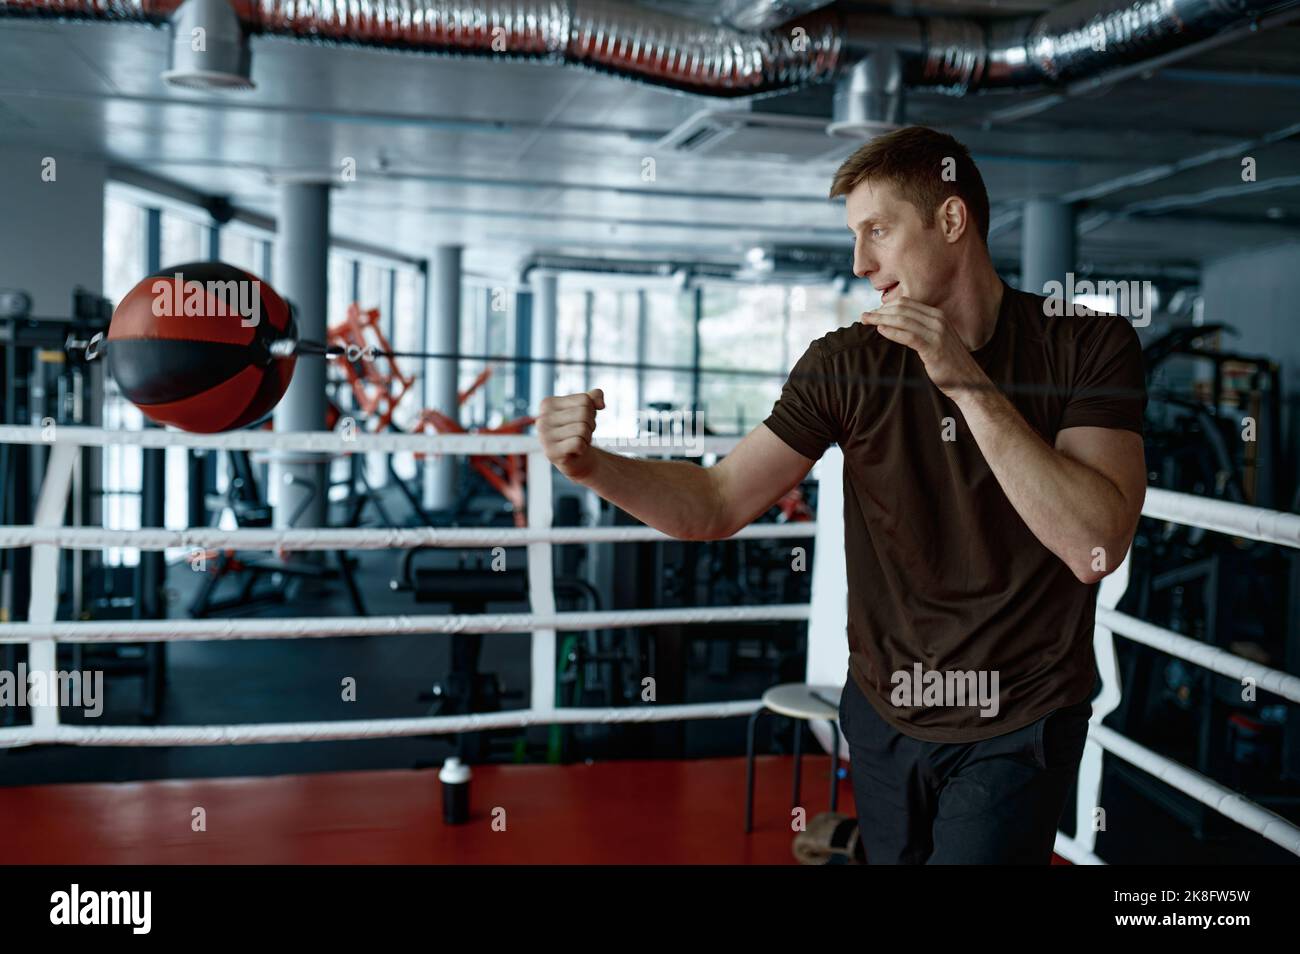 Young boxer trains with punching bag in gym Stock Photo